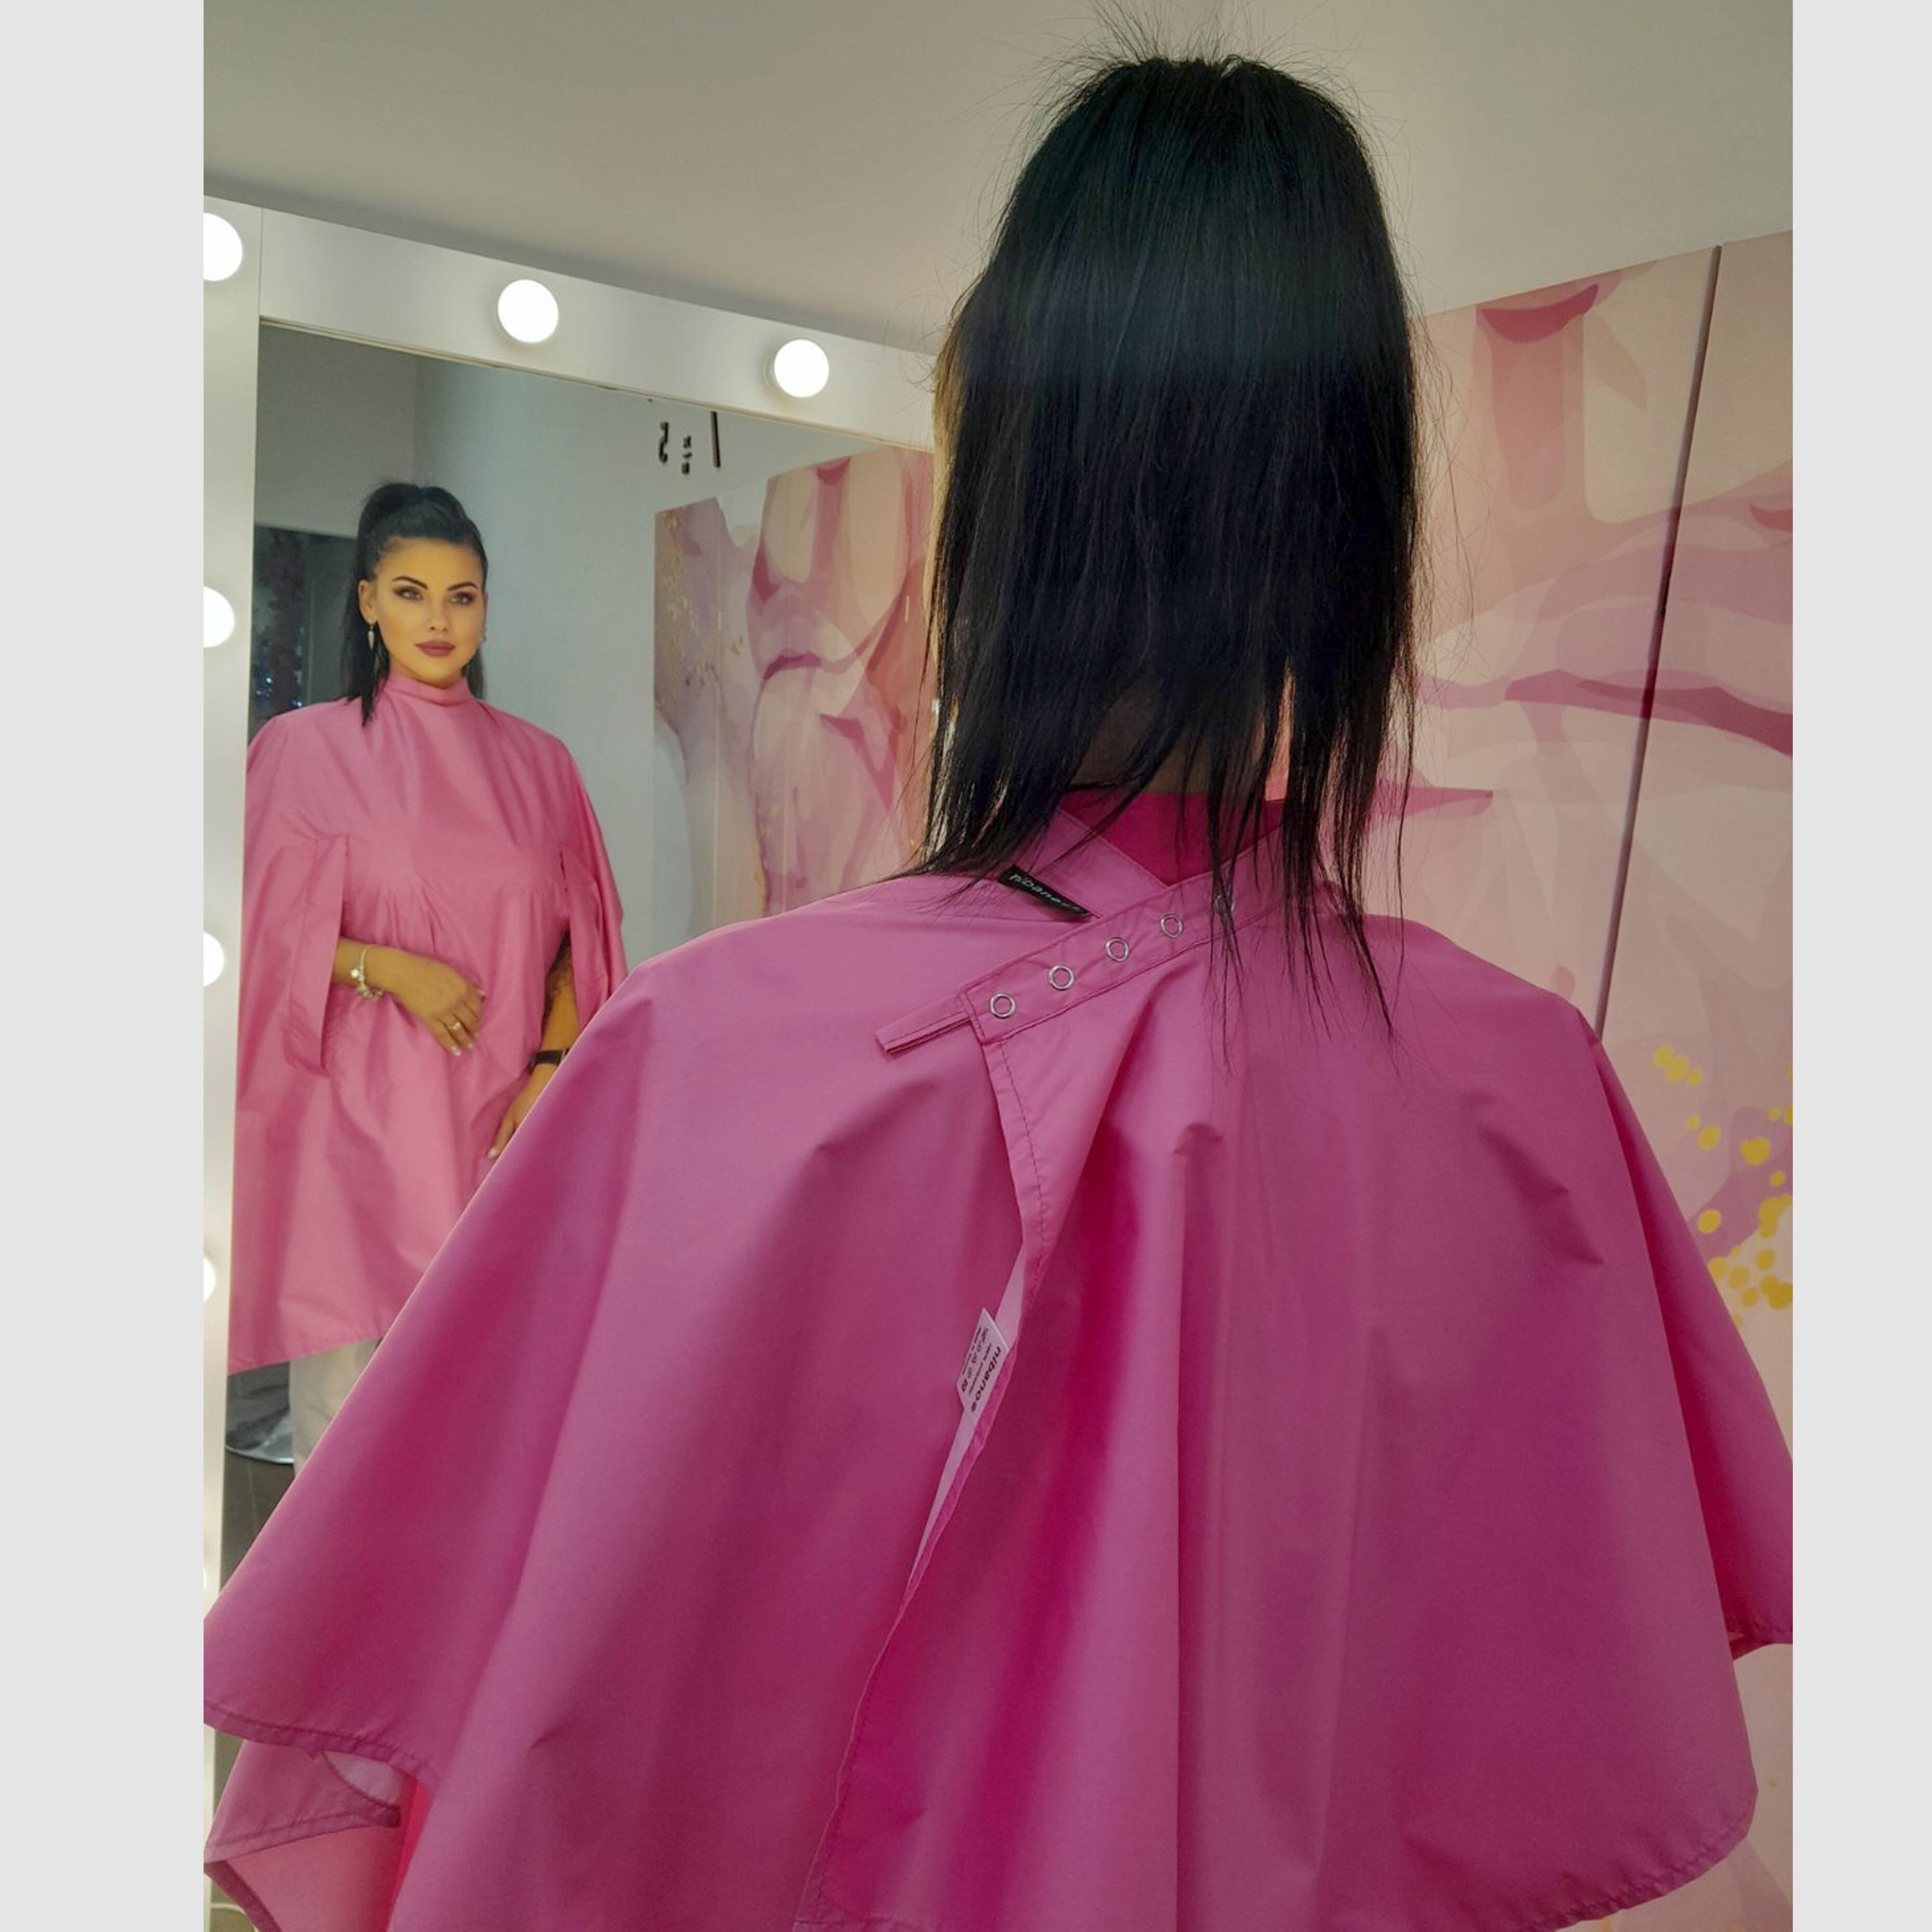 Nibano barber cape with handsplits & poppers Pink Barbie